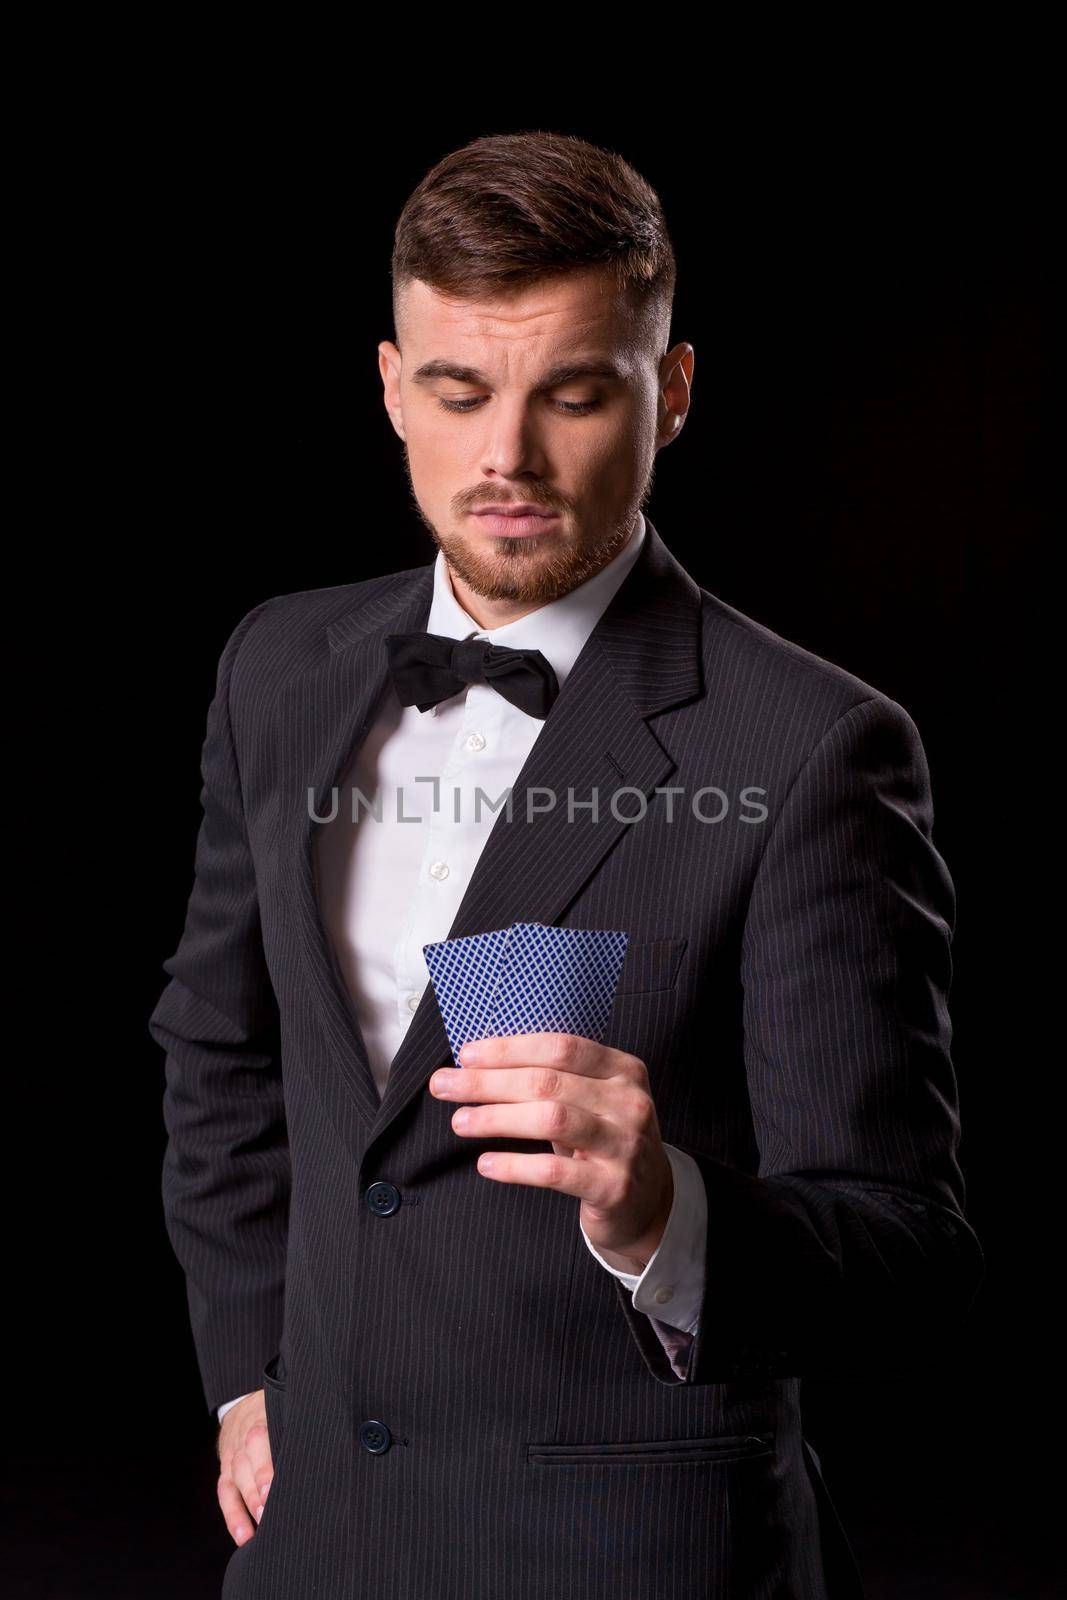 man in a suit posing with cards for gambling on black background